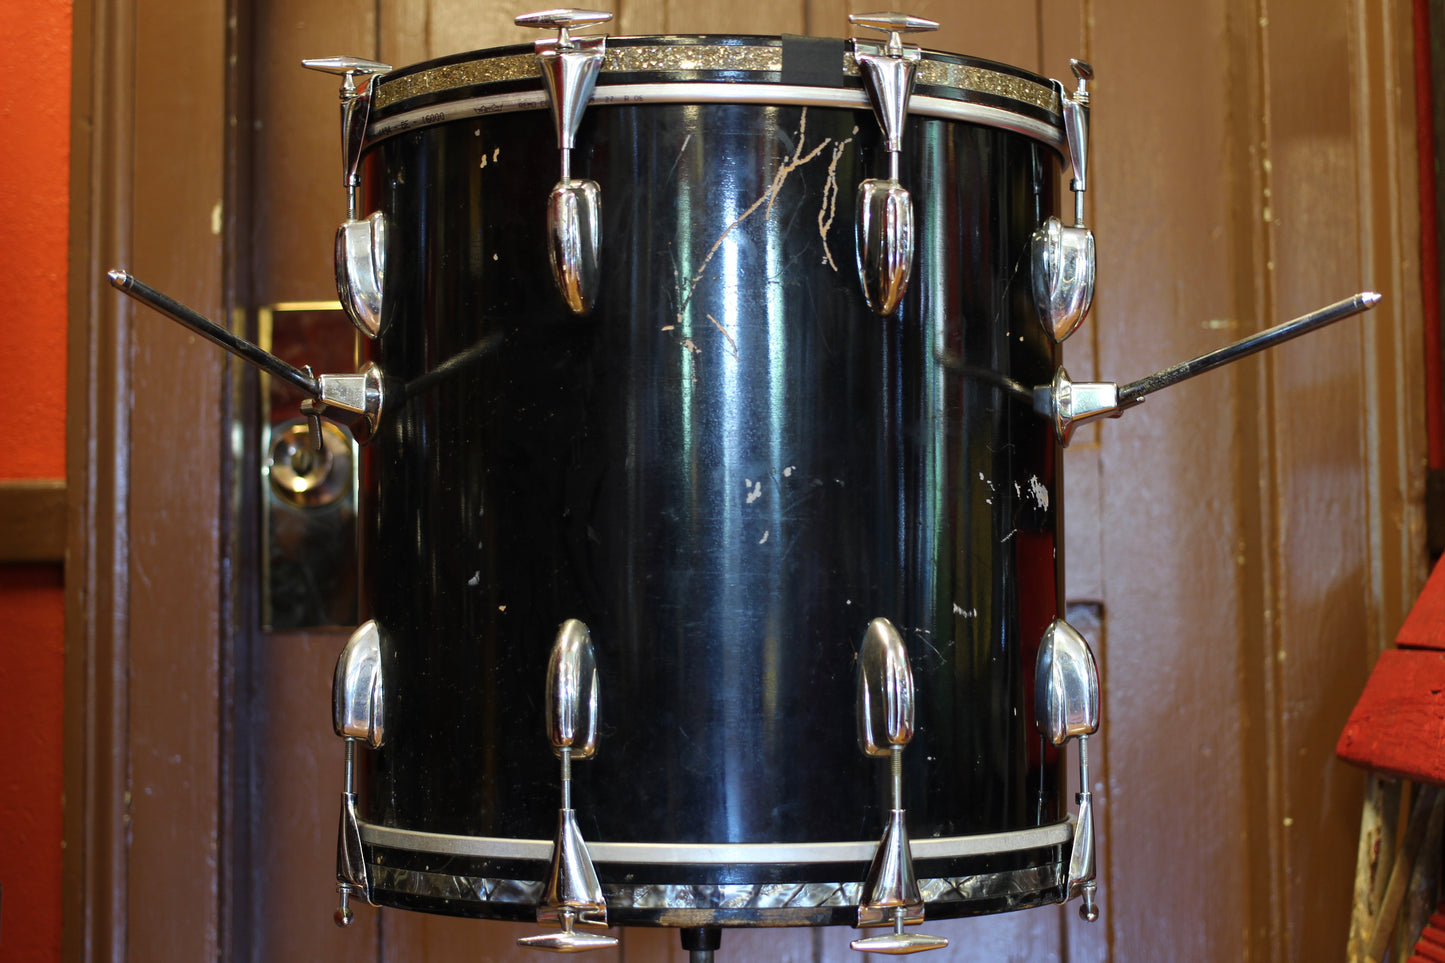 1965 Slingerland 16"x16" Bass Drum in Black Lacquer